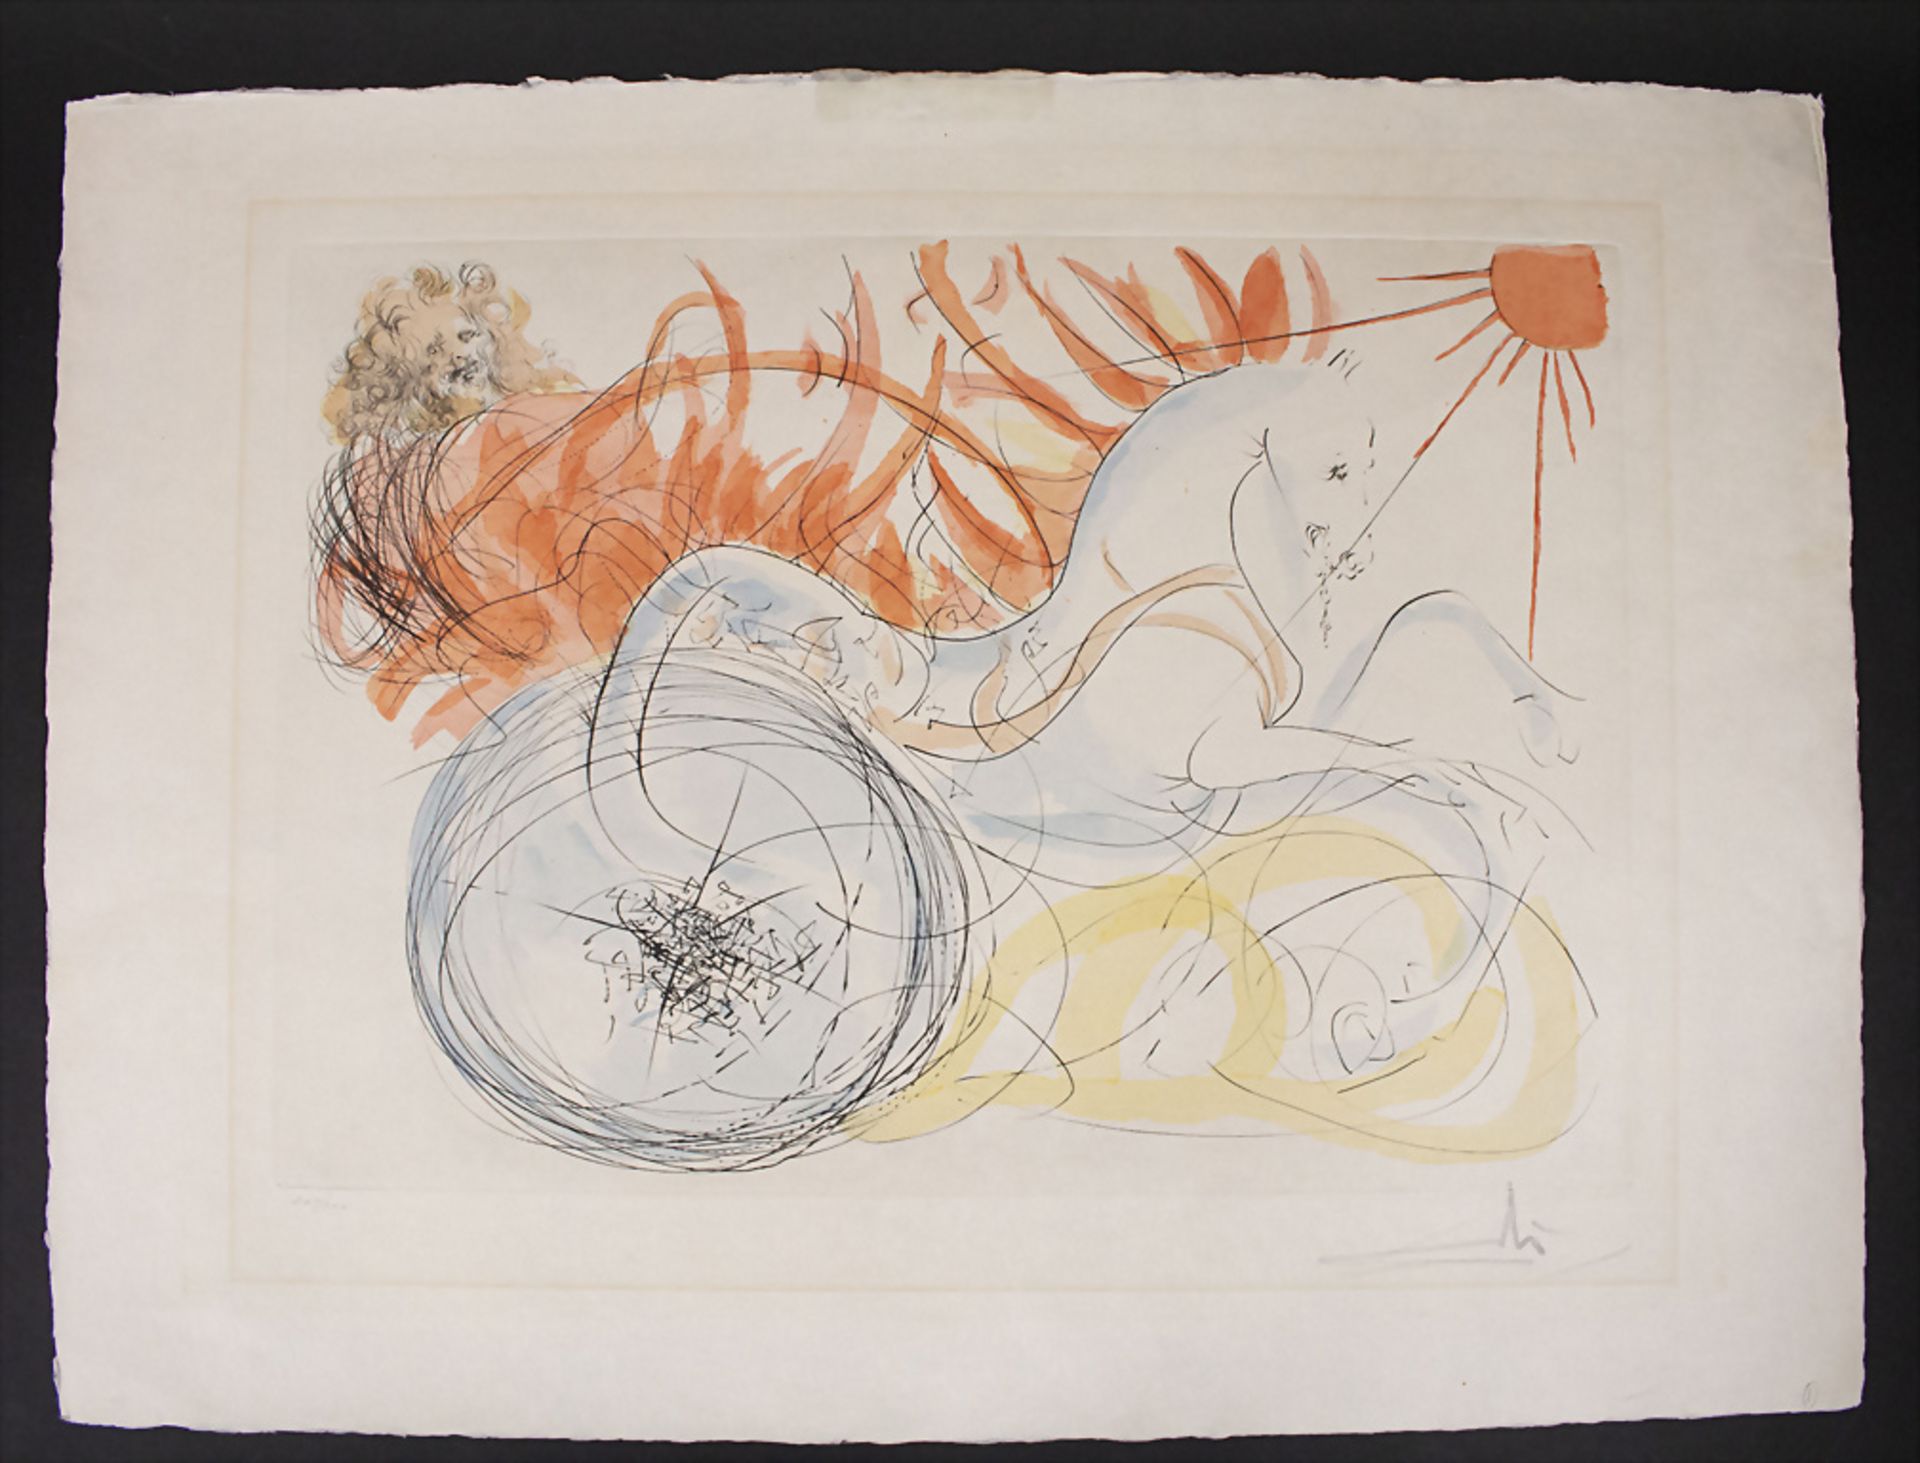 Salvador DALI (1904-1989), 'Helios mit dem Sonnenwagen' / 'Helios and the sun chariot', 20. Jh. - Image 2 of 6